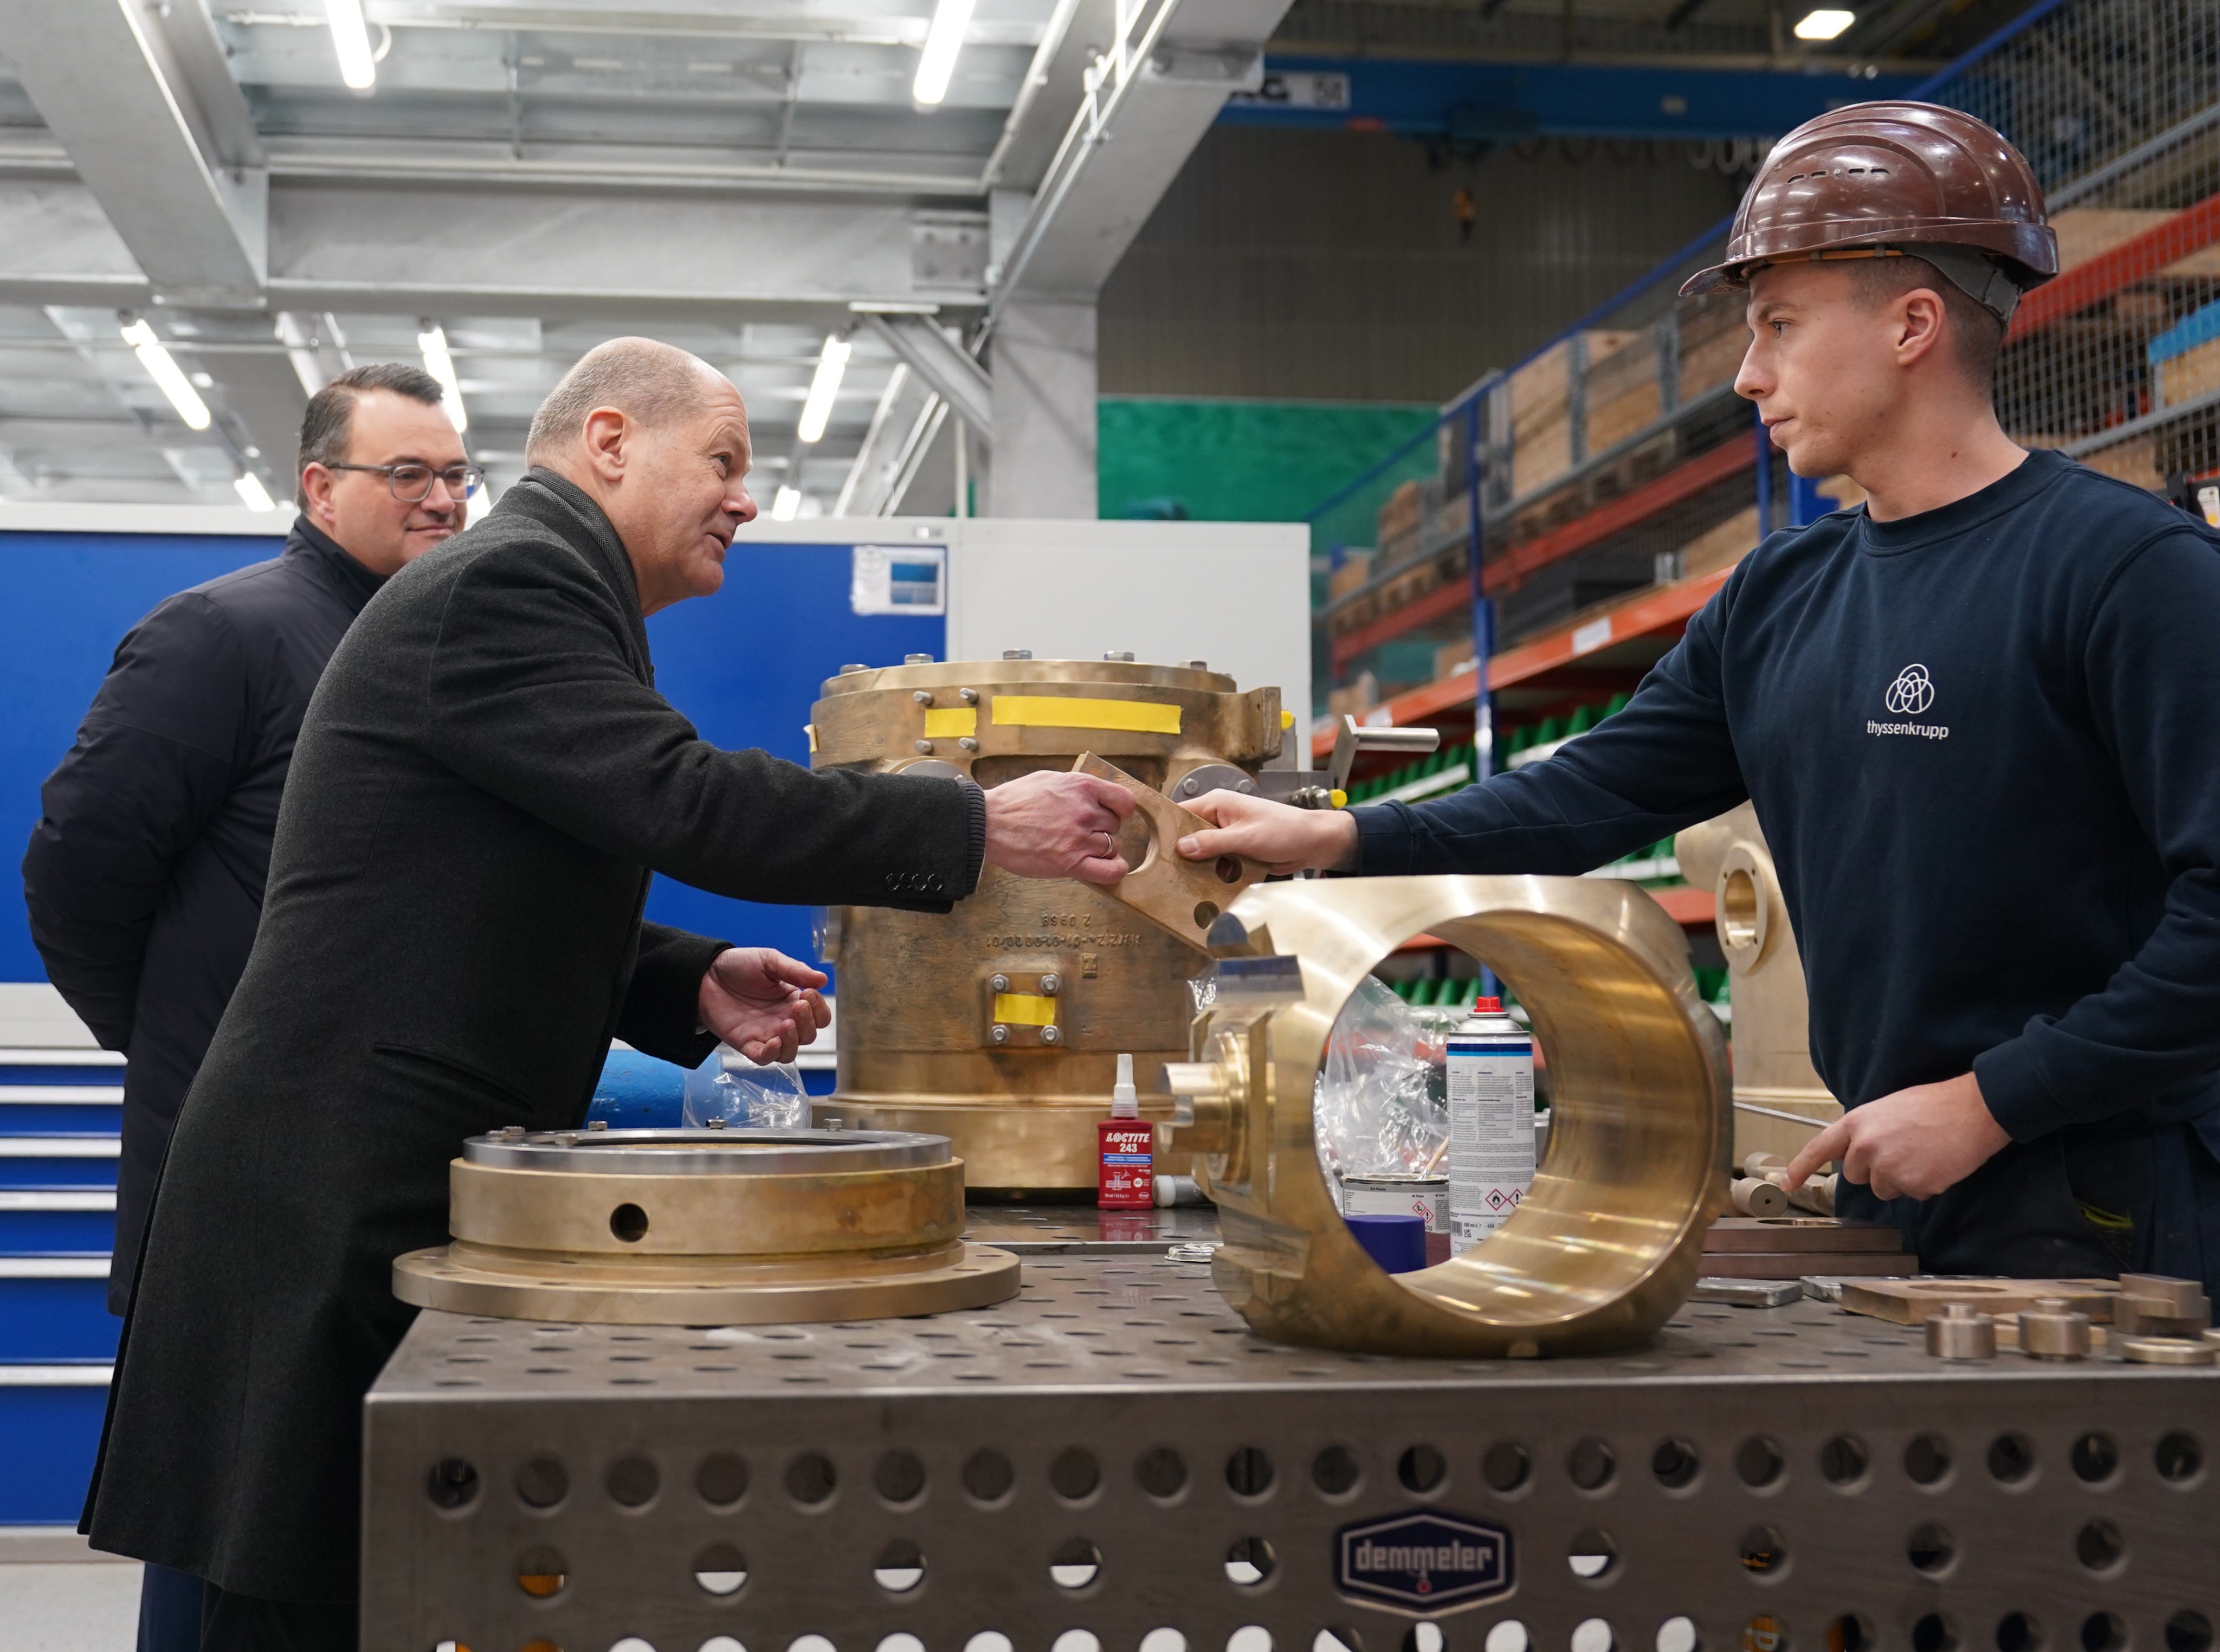 German Chancellor Olaf Scholz (second left) meets employees during a factory tour at the Thyssenkrupp Marine Systems shipyard in Kiel, Germany, on December 13, 2022. Photo: EPA-EFE